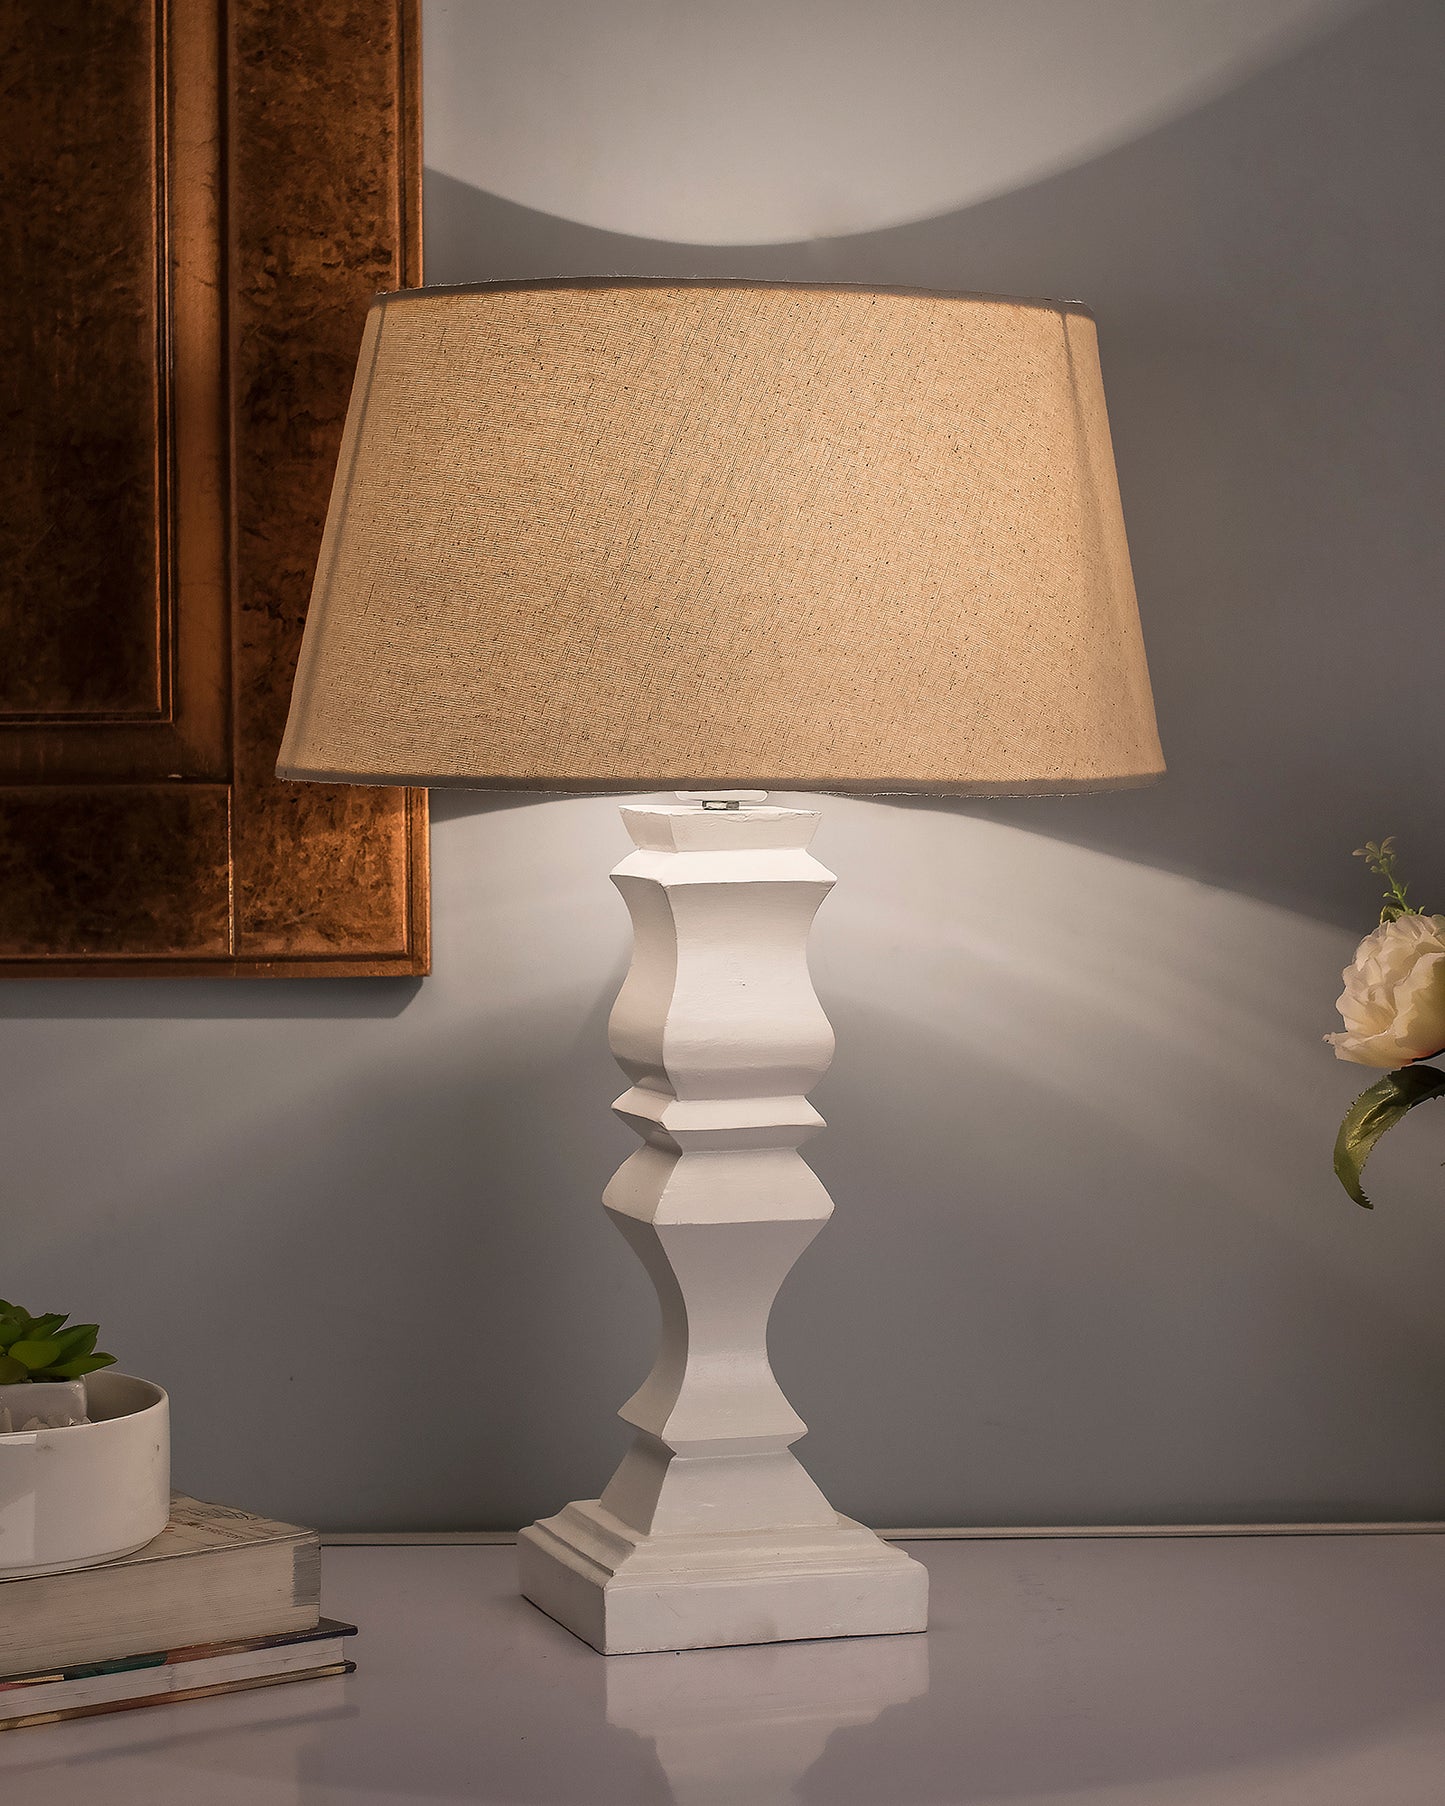 Classic Cube Cut White Table Lamp with Empire Drum Shade